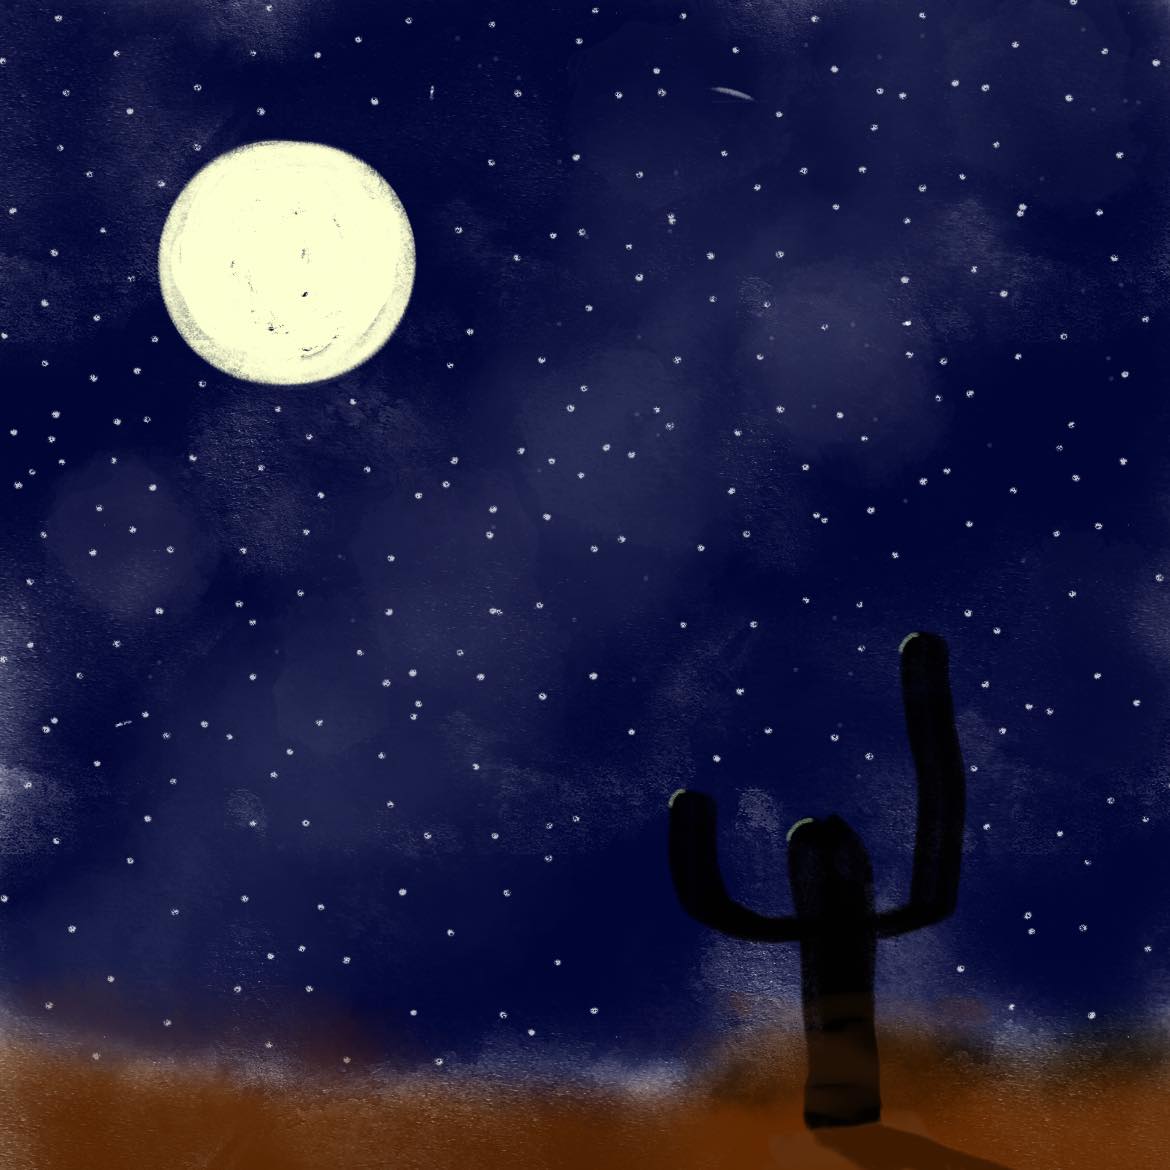 midnight in the desert with full moon and cactus